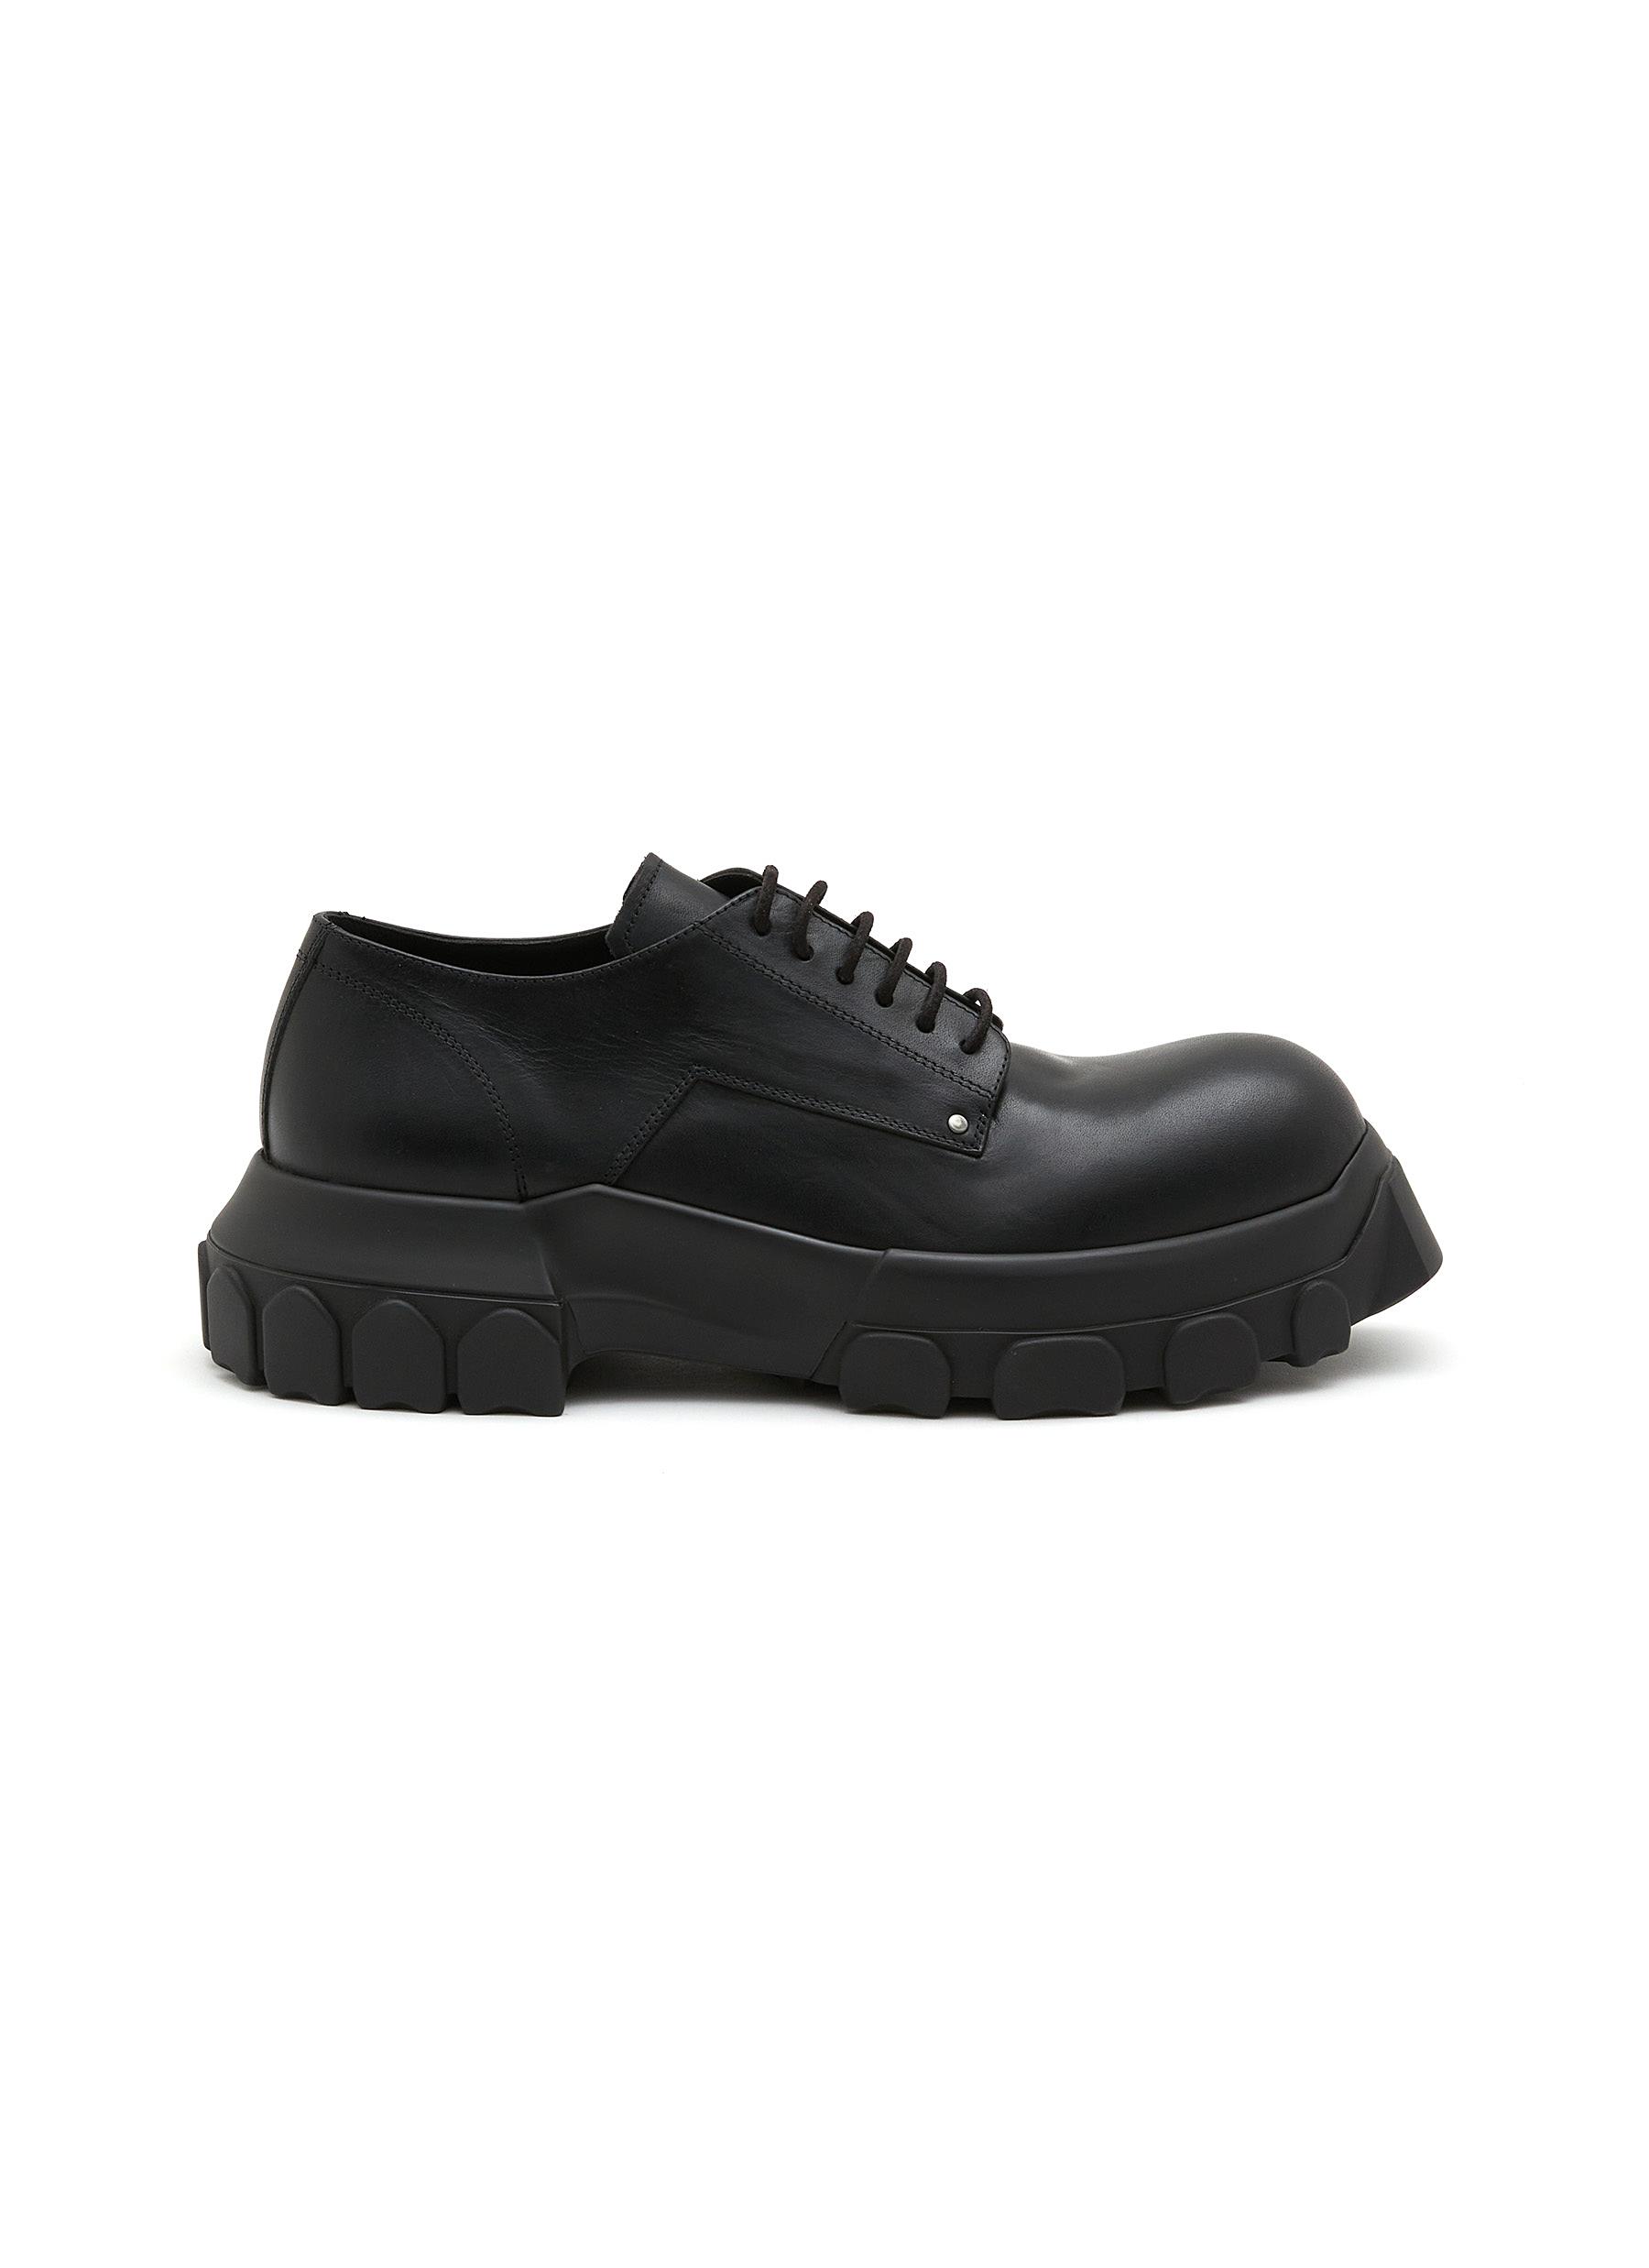 RICK OWENS | Bozo Tractor Lace Up Shoes | Men | Lane Crawford